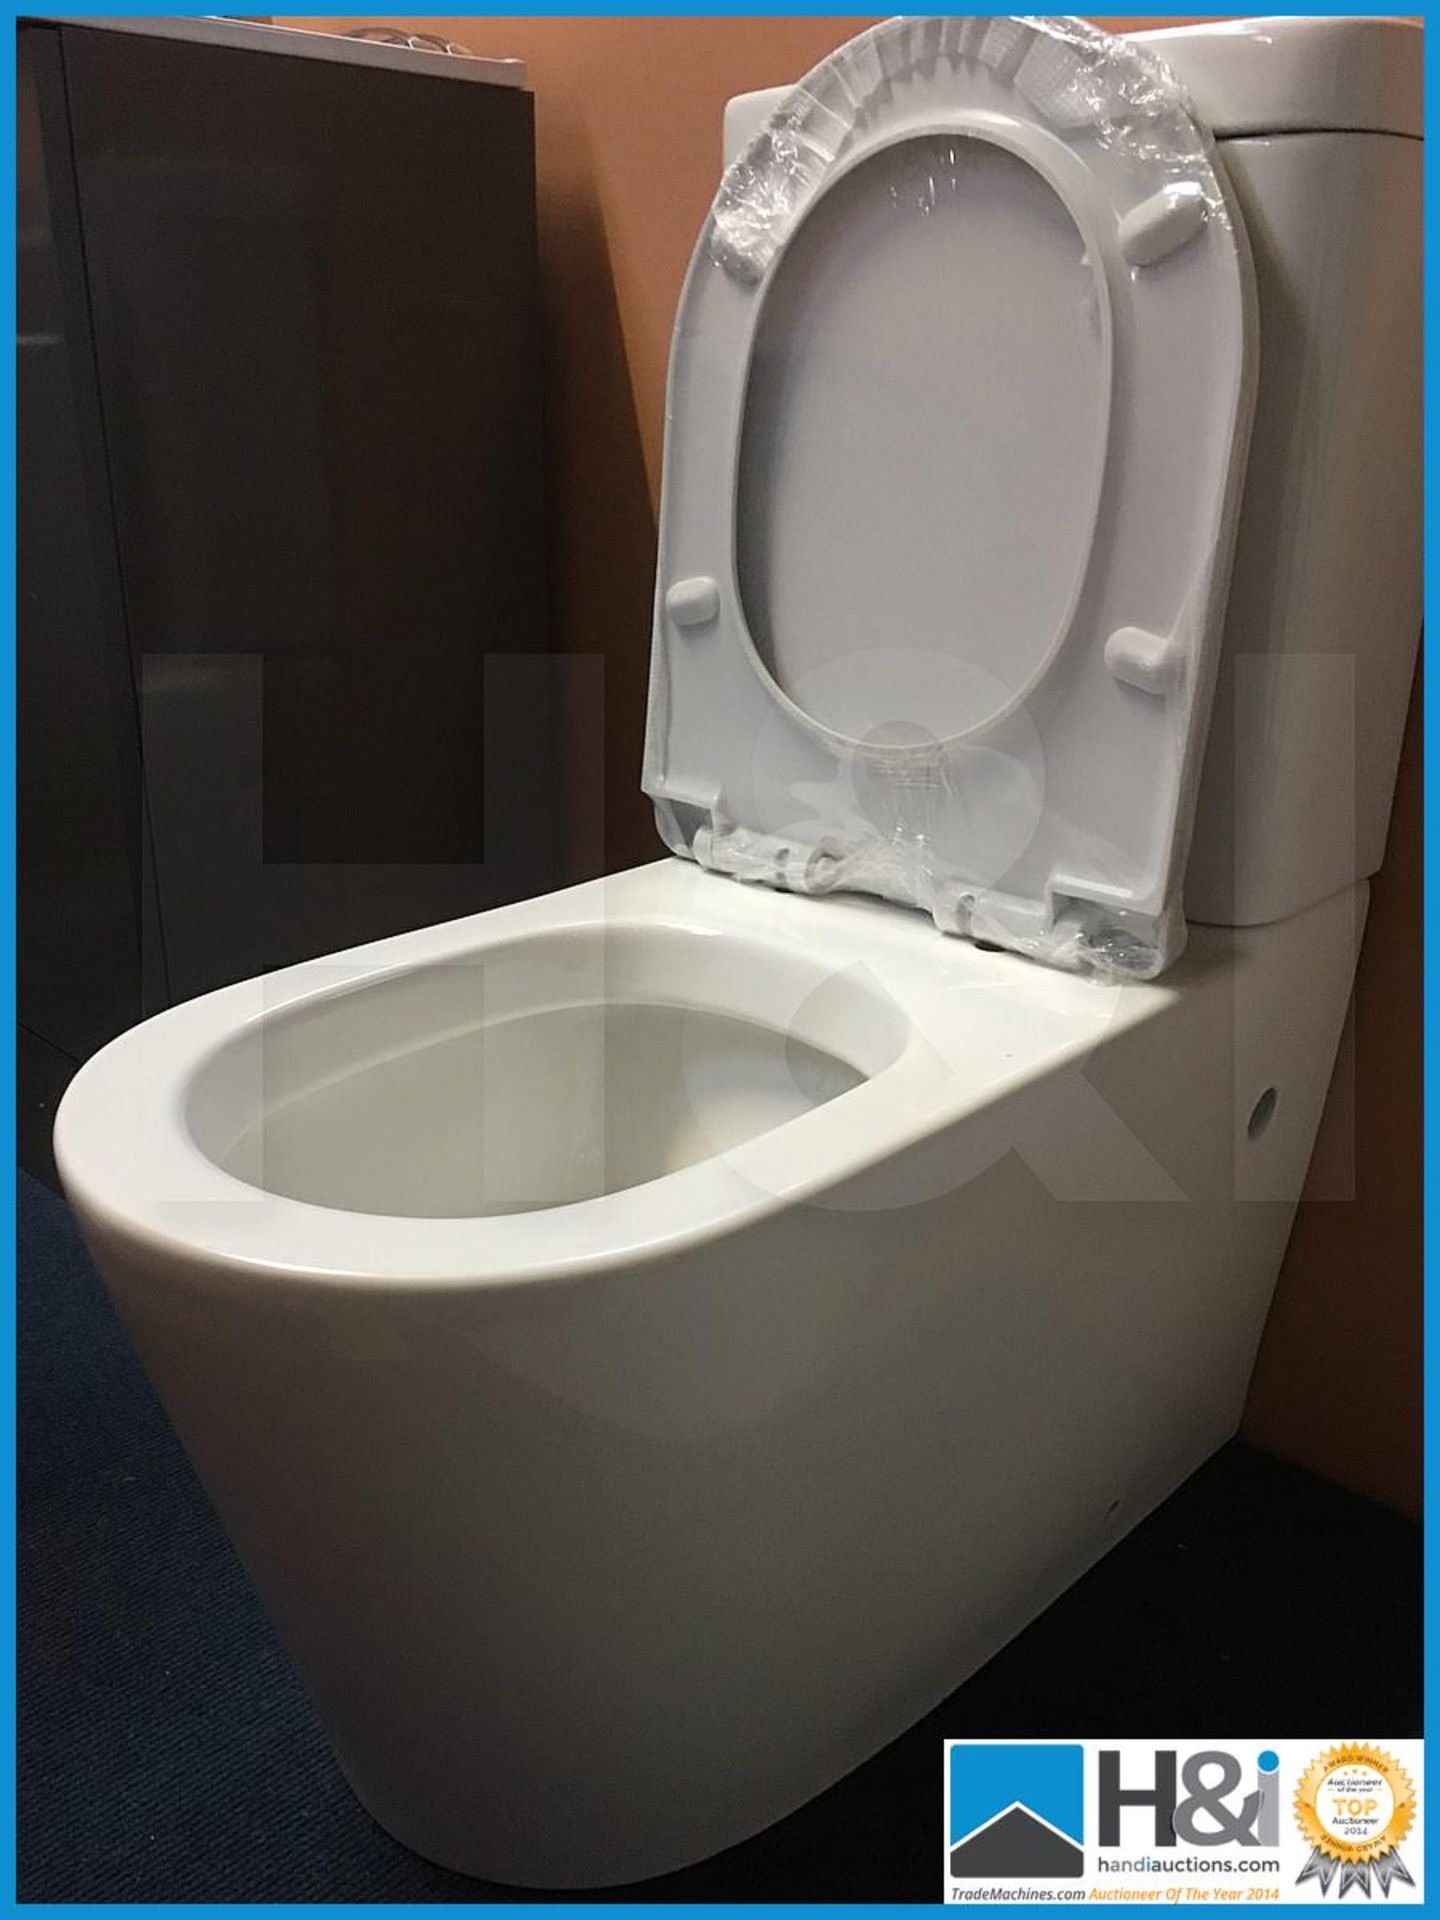 Stunning designer contemporary K008 WC with top flush and soft close seat. New and Boxed. - Image 3 of 3